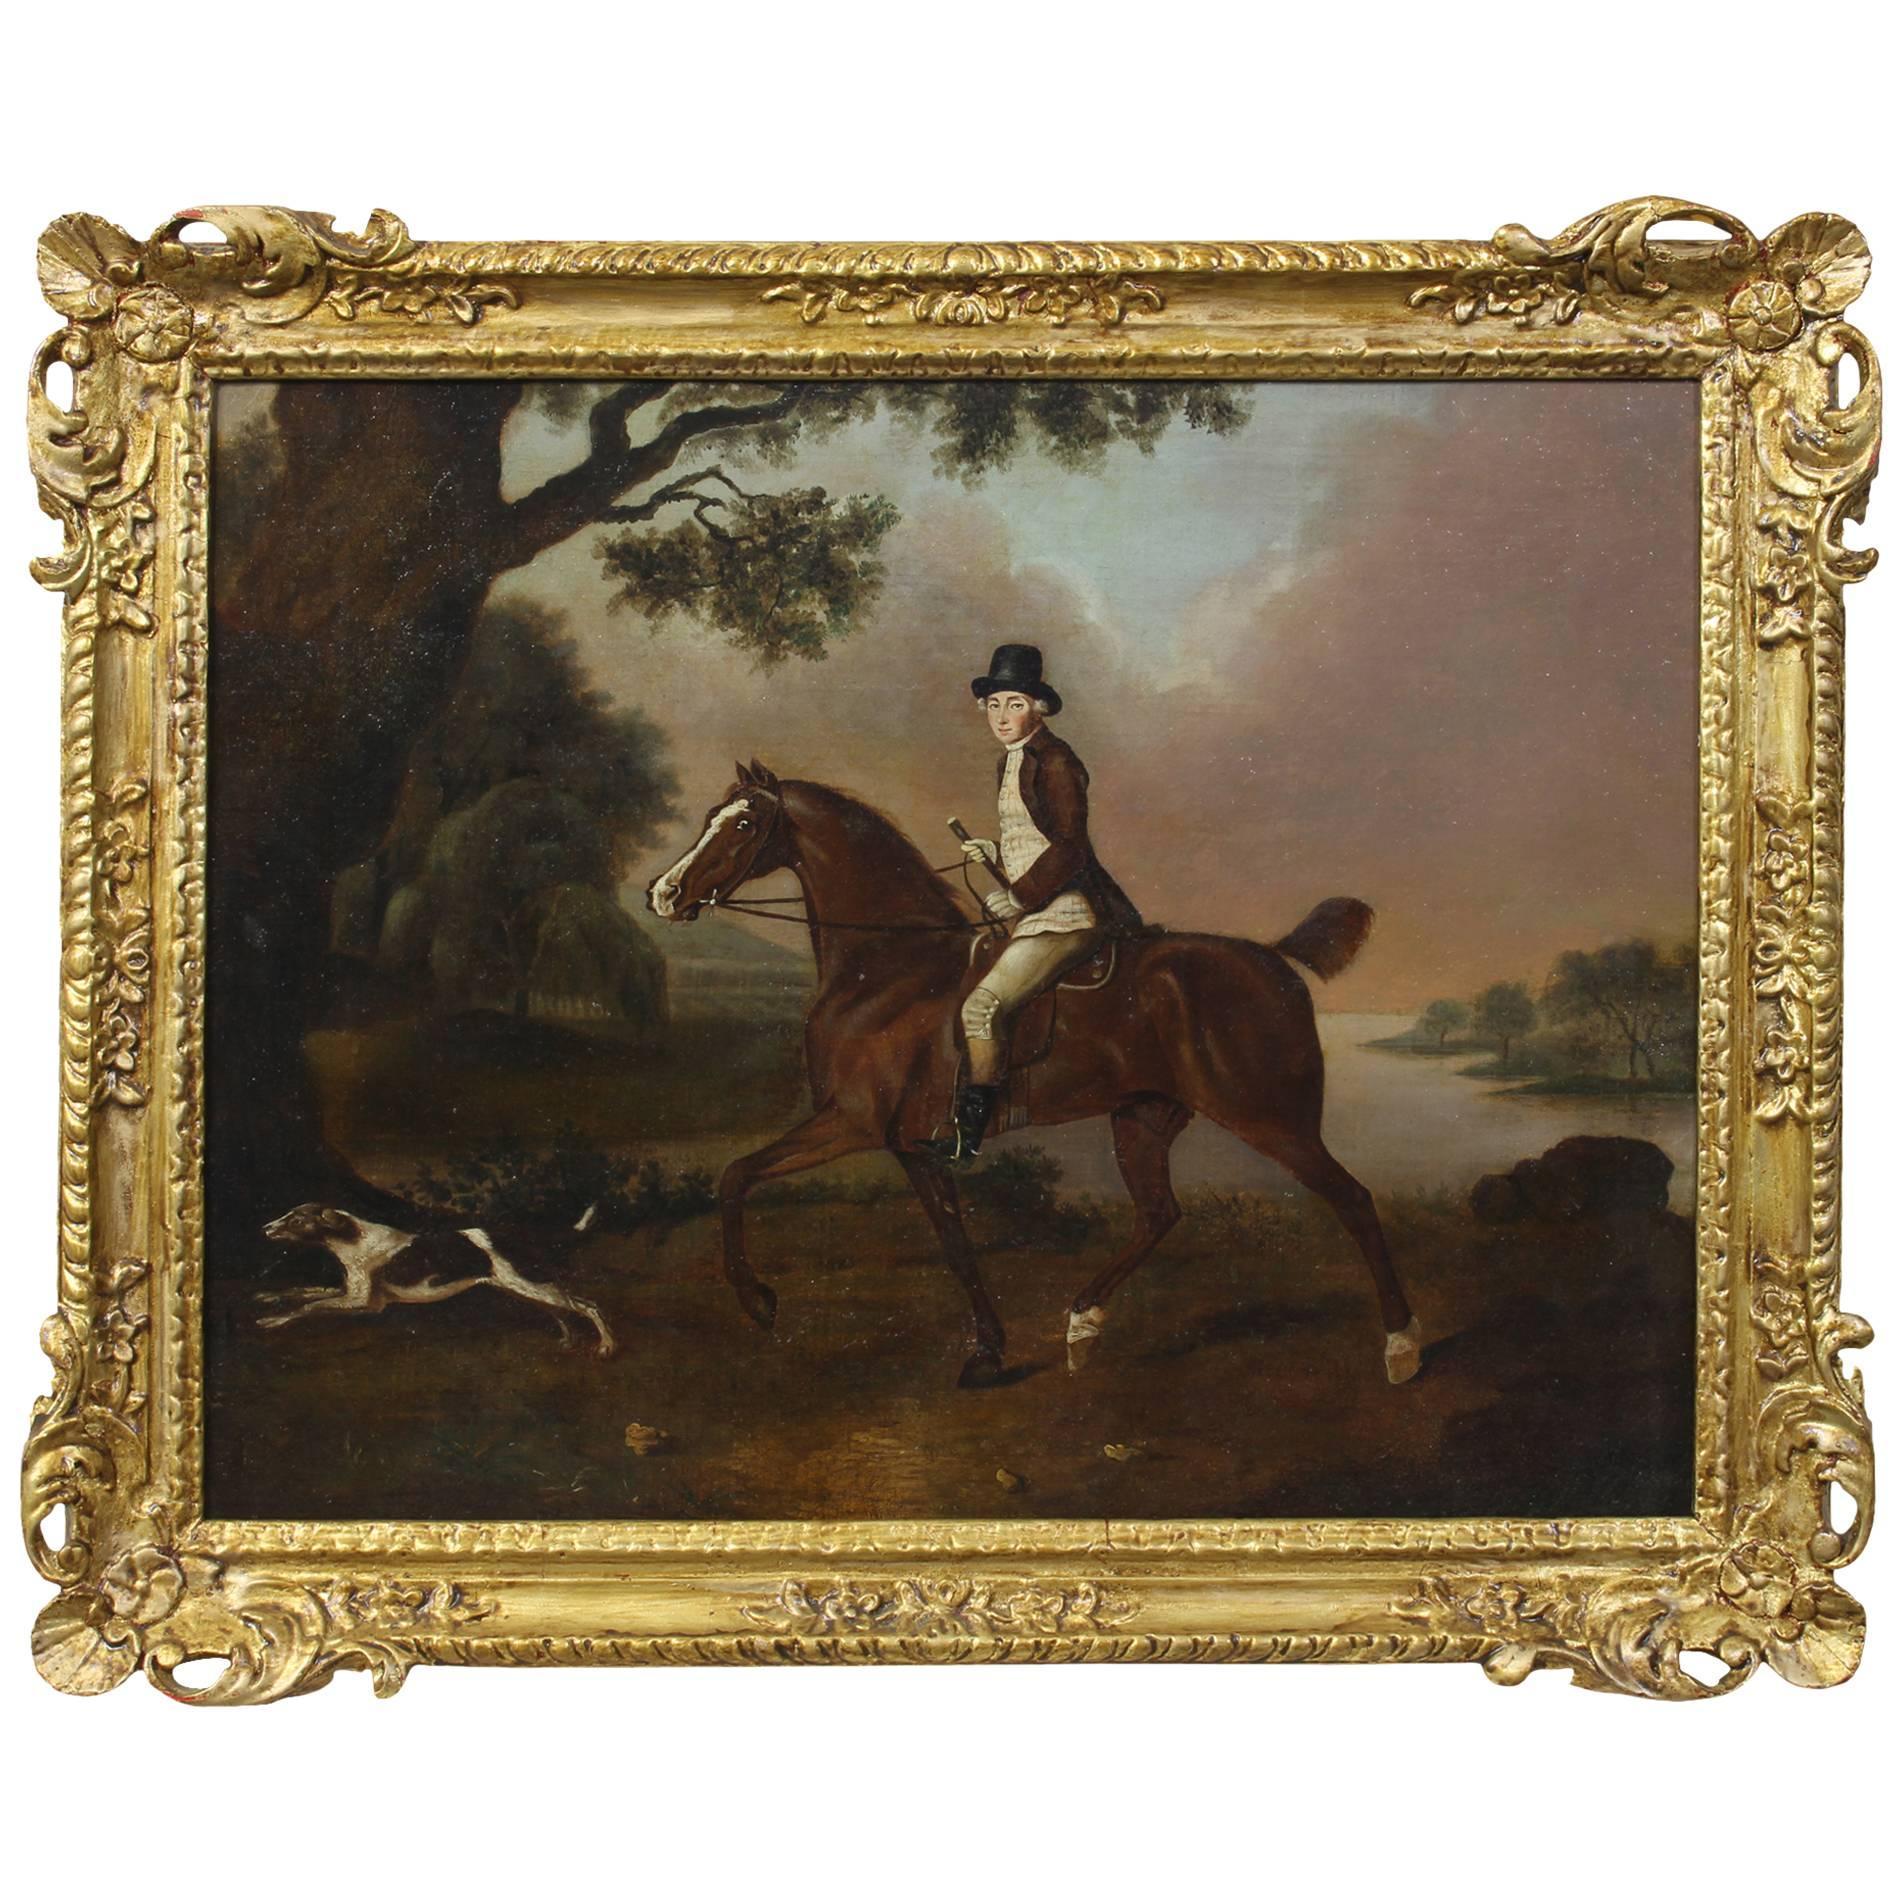 Late 18th Century English Sporting Painting in the Manner of George Stubbs